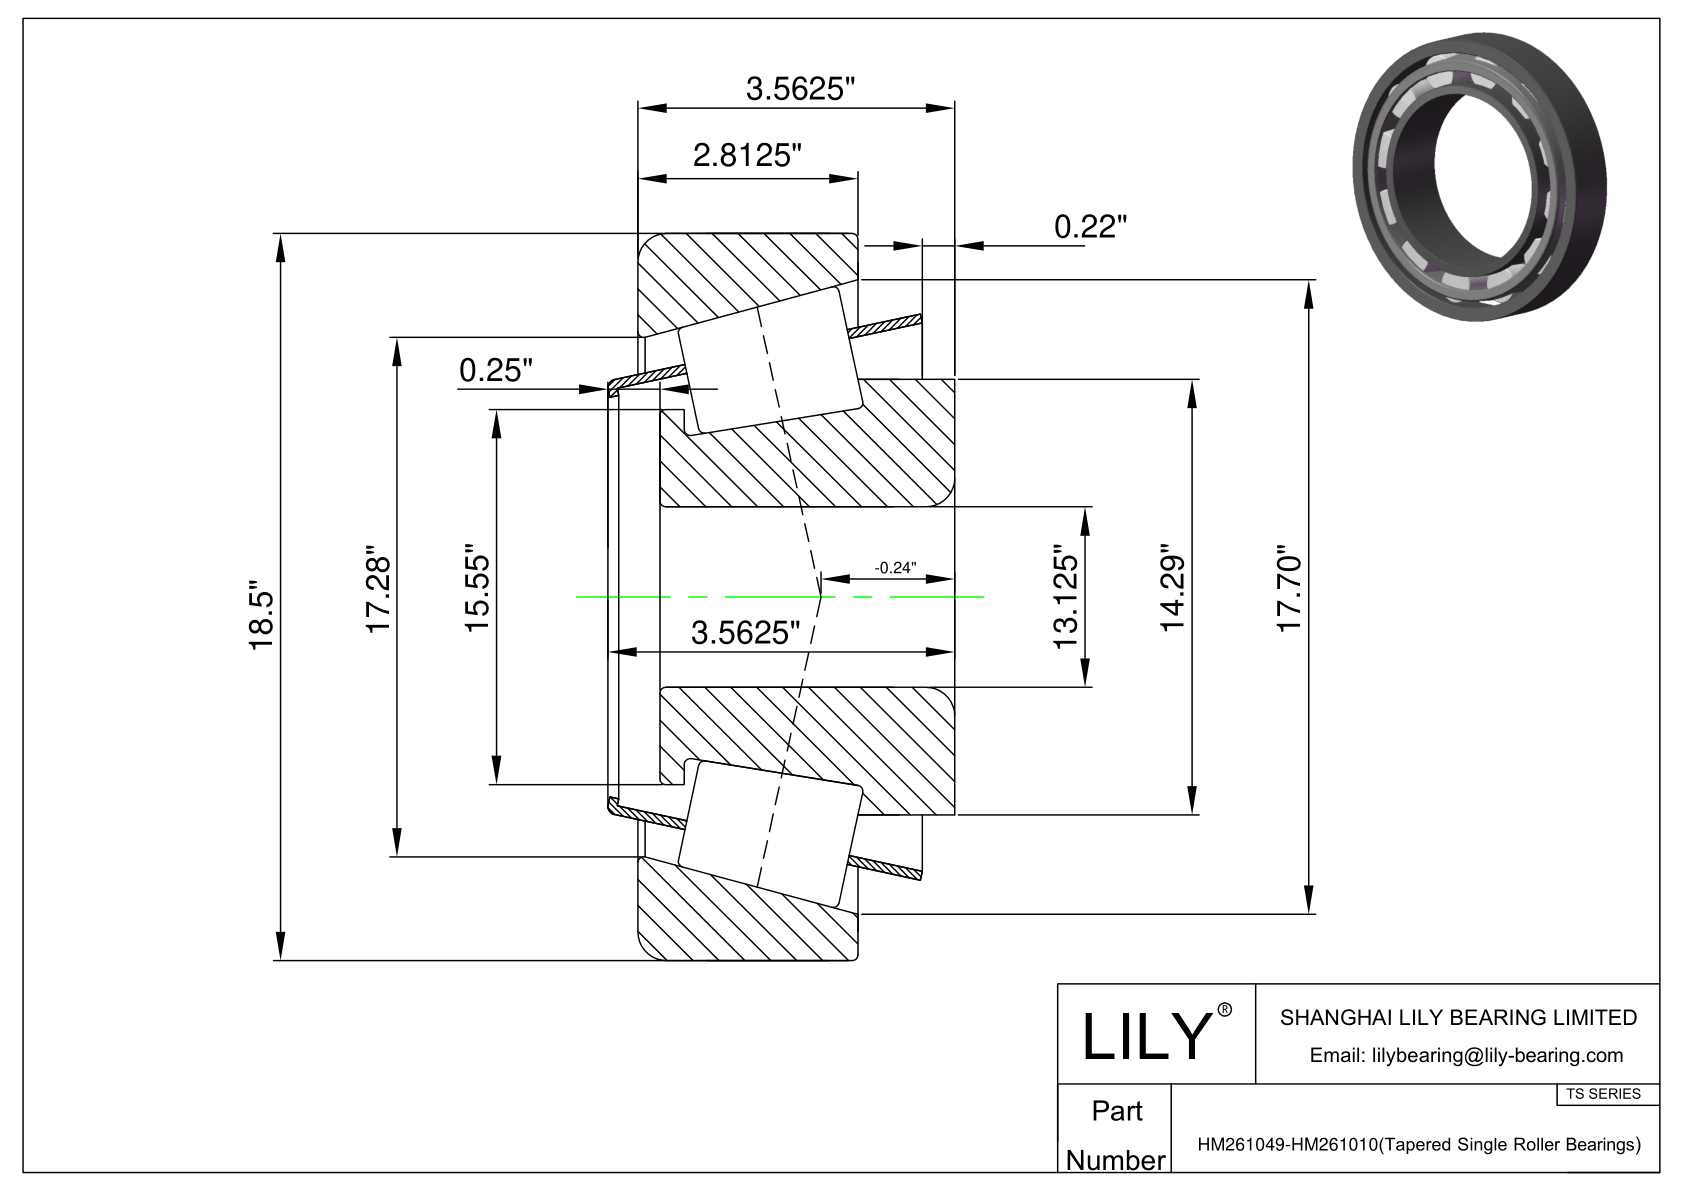 HM261049-HM261010 TS (Tapered Single Roller Bearings) (Imperial) cad drawing